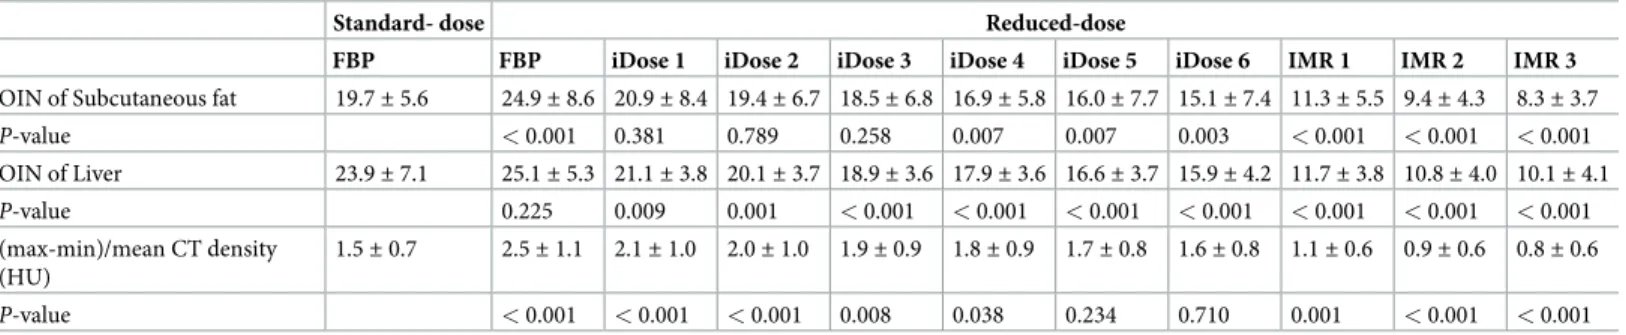 Fig 1 and Table 2 shows the results of qualitative analysis. The beam hardening artifacts in the reduced-dose scan with FBP reconstruction were significantly greater than those in the  stan-dard-dose scan with FBP reconstruction ( P = 0.025)